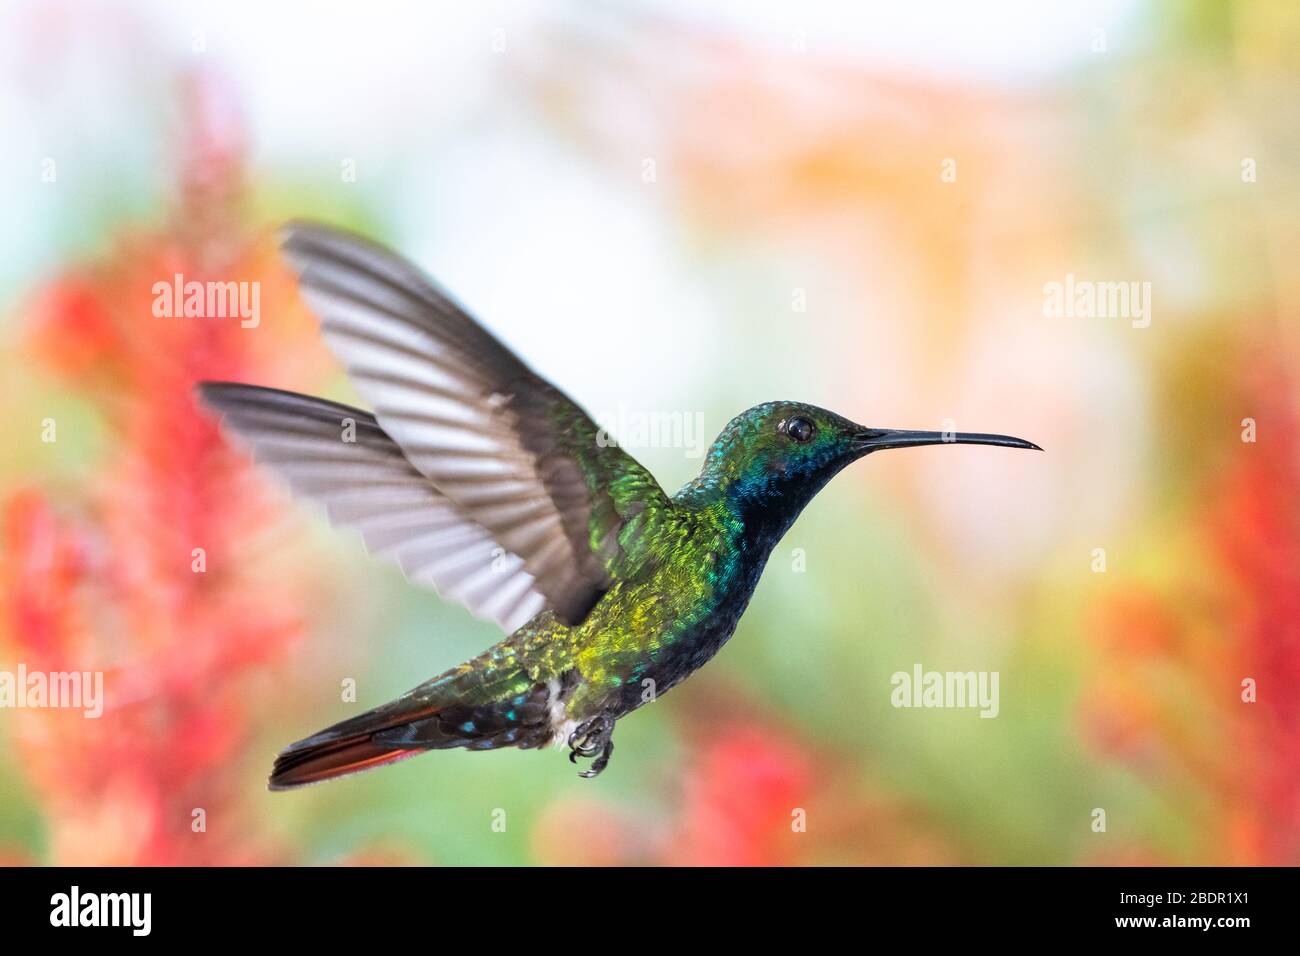 A Black-throated Mango hummingbird hovering in a tropical garden with flowers and foliage blurred in the background. Stock Photo